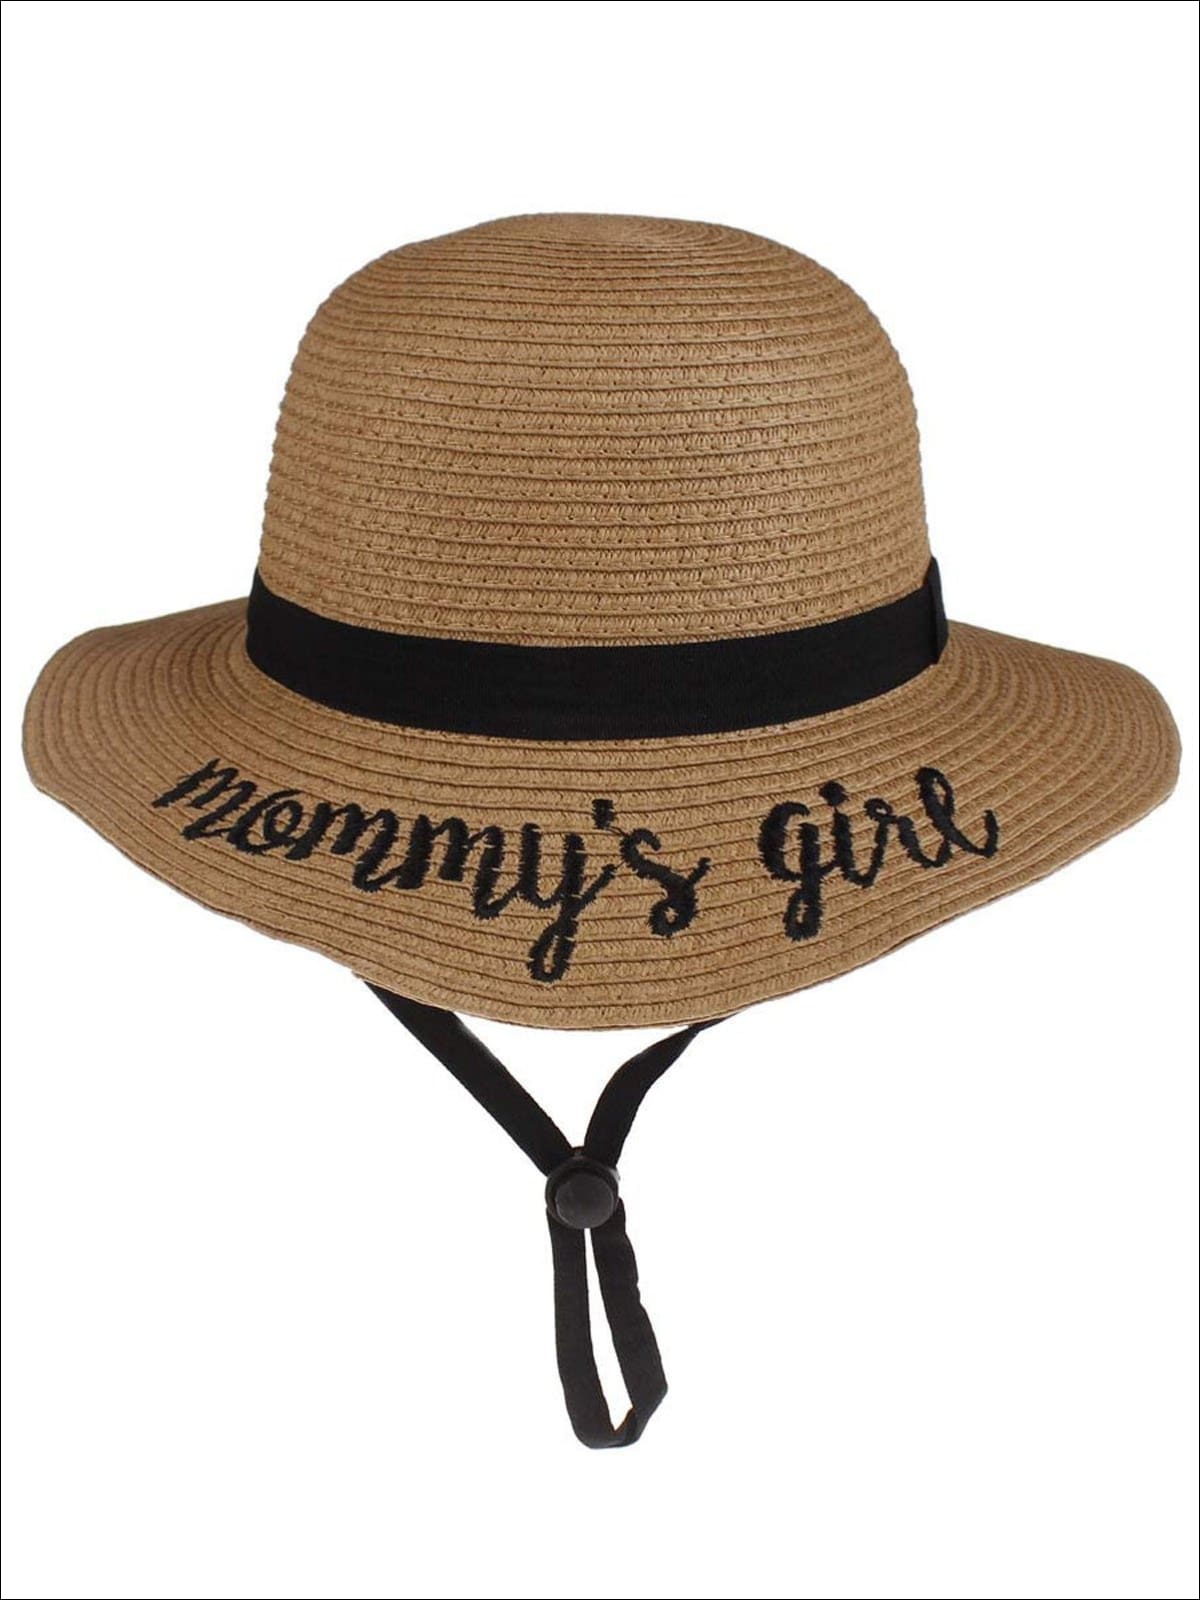 Girls Embroidered Saying Straw Hat With Strap - Tan- Mommys Girl - Girls Hats